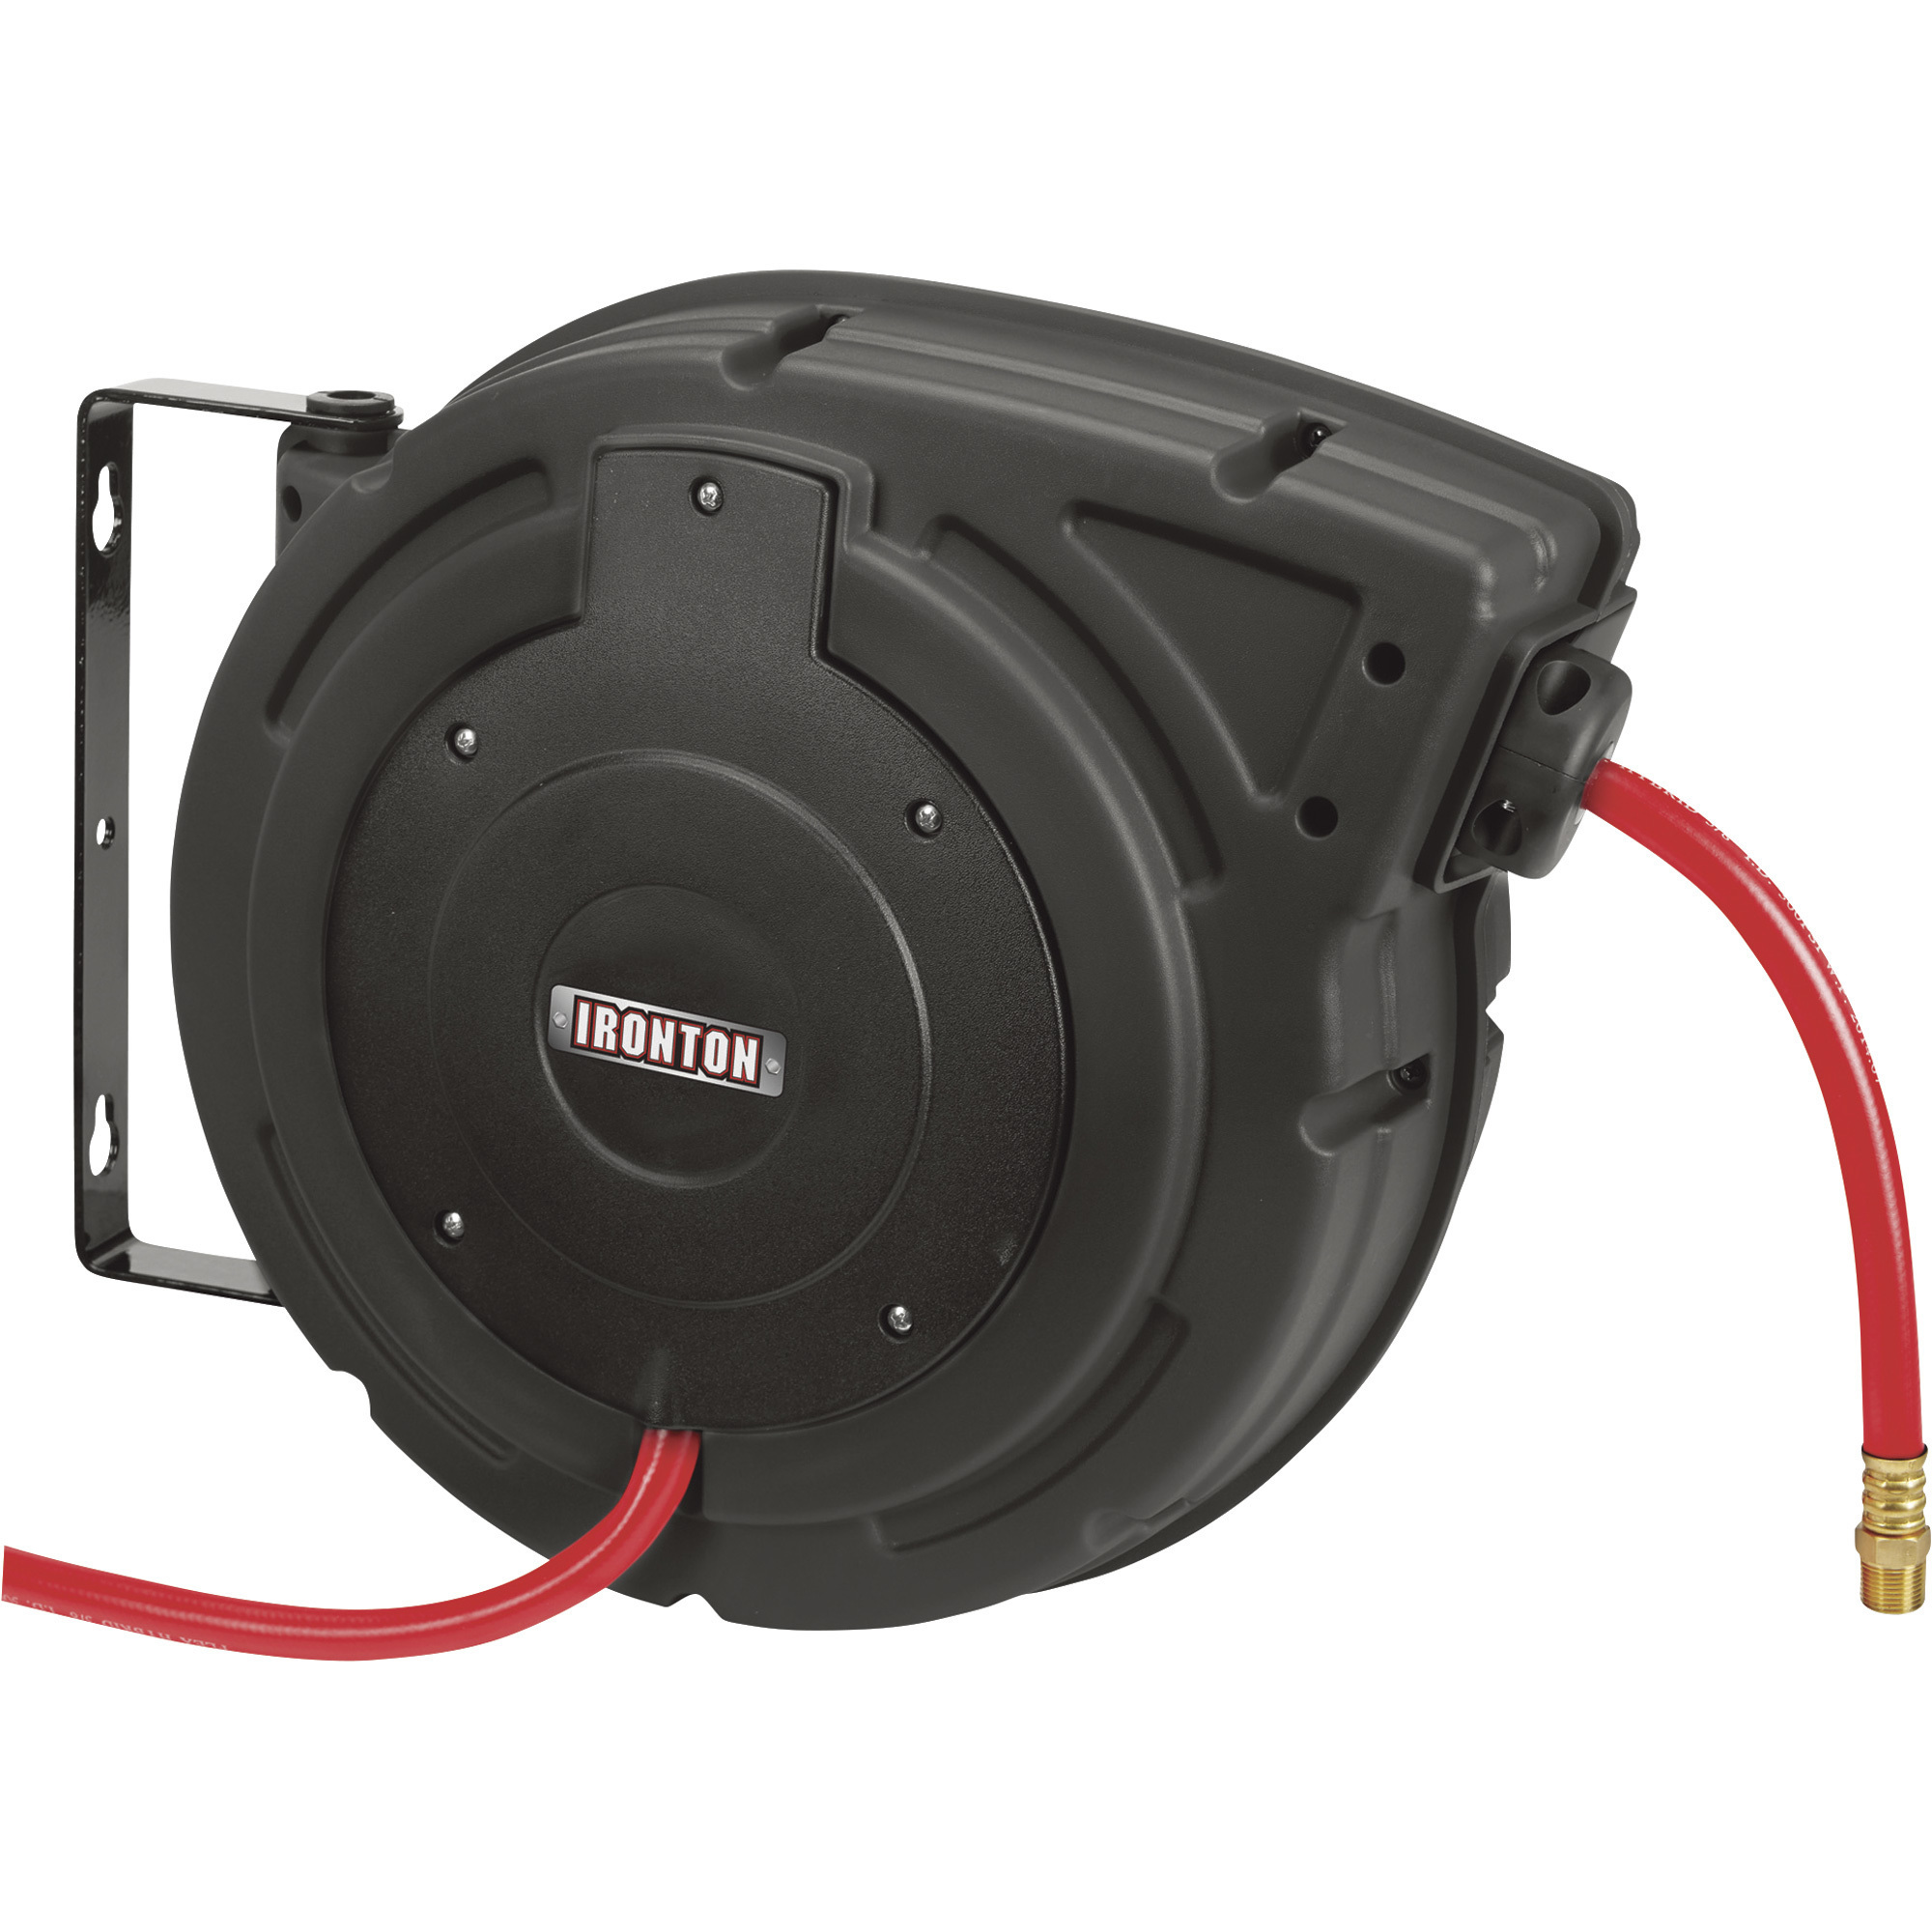 Ironton Compact Air Hose Reel, With 3/8Inch x 50ft. Hybrid Polymer Hose, Max. 300 PSI